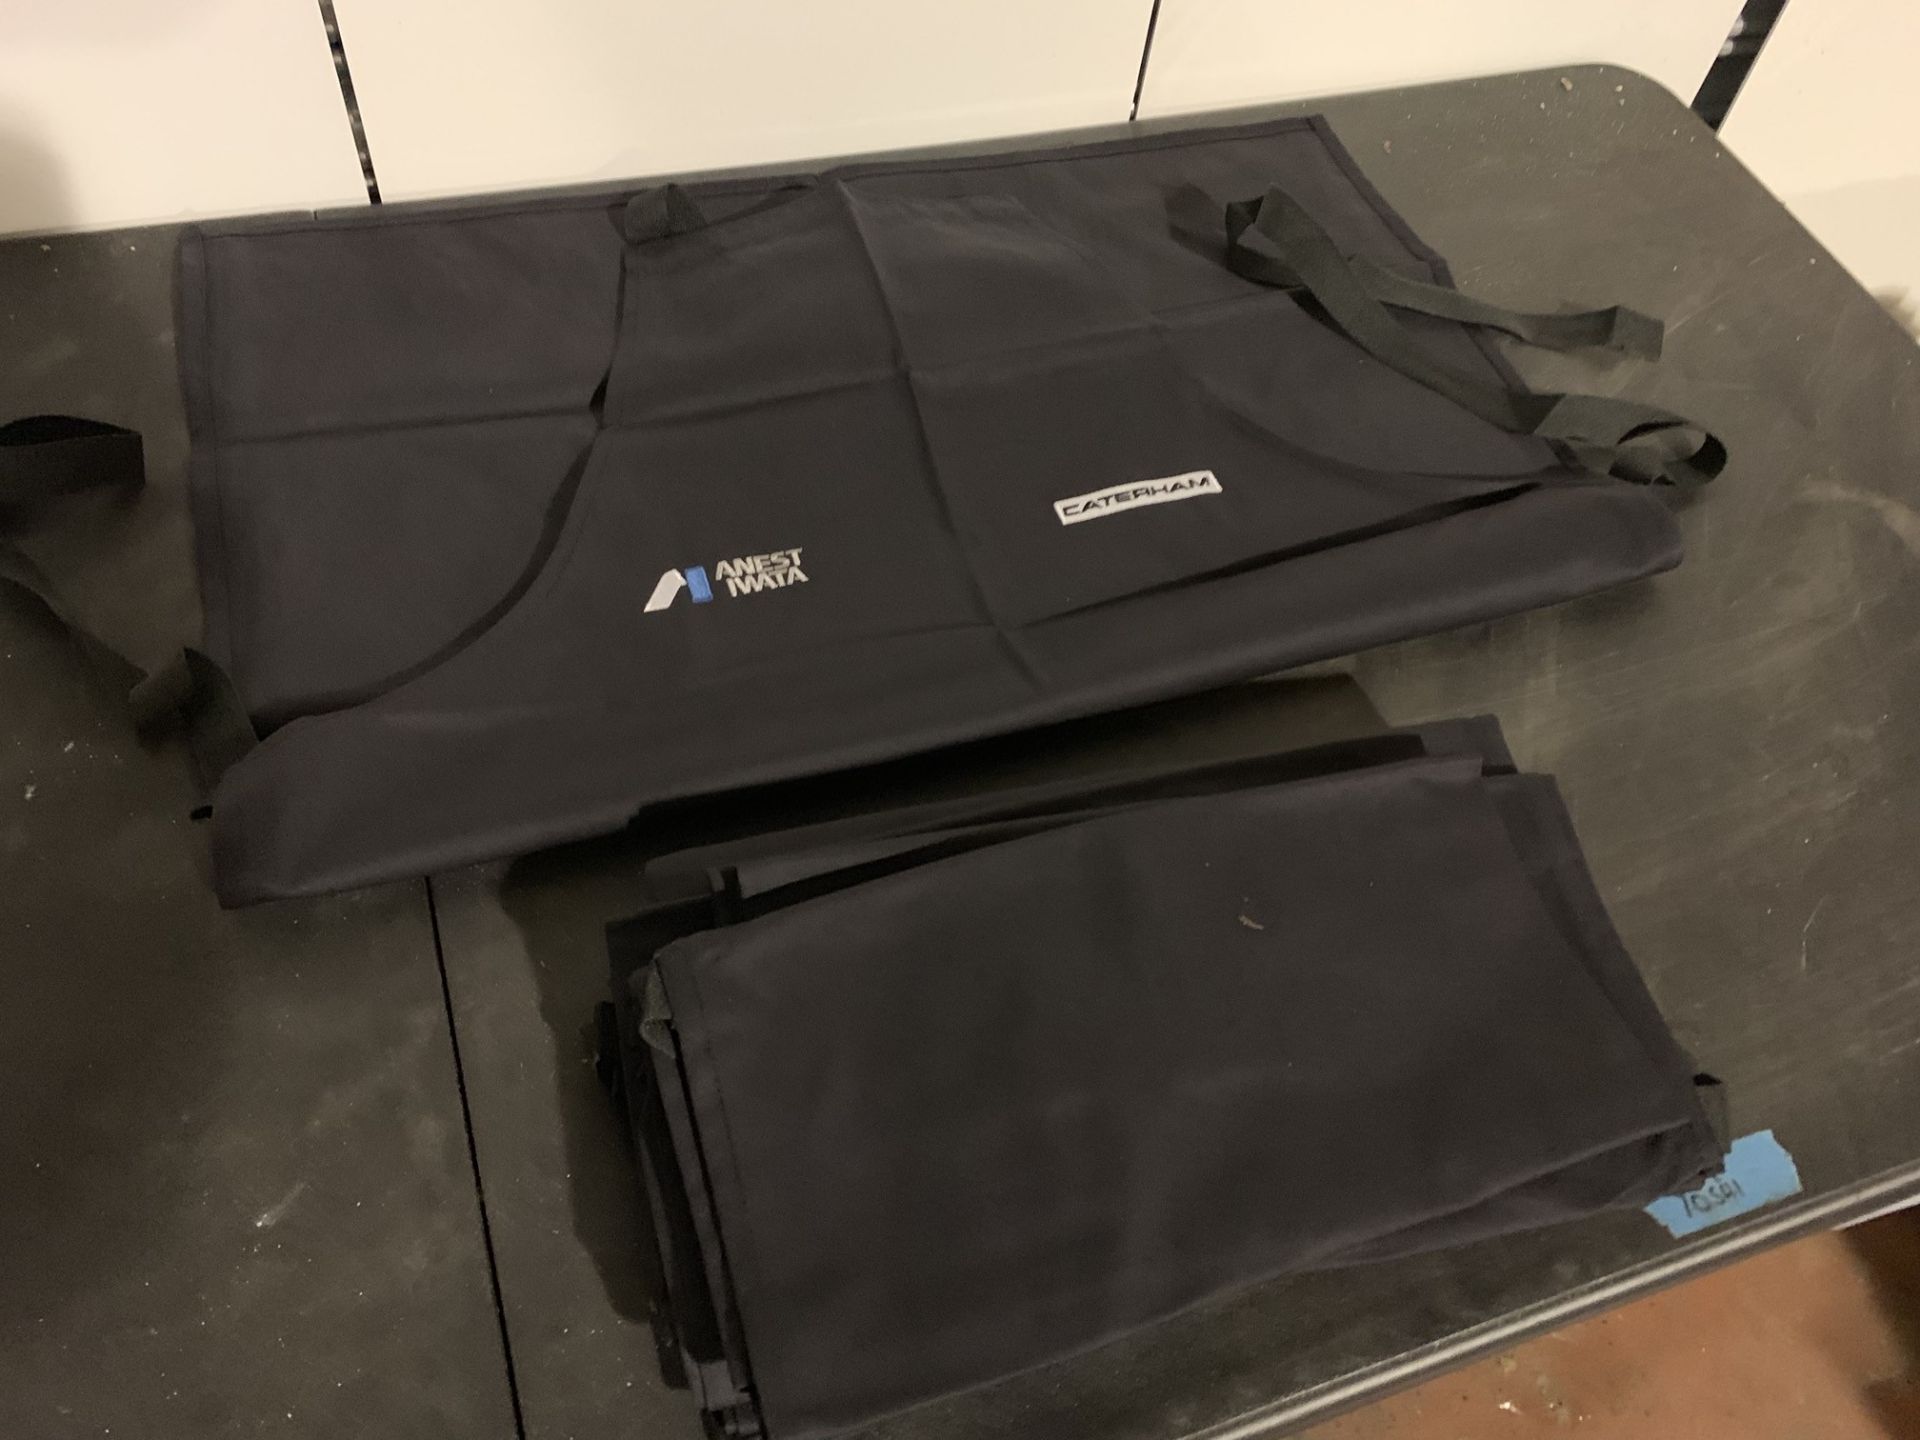 CATERHAM F1 TECHNICIAN APRON PACK OF 10 - Image 2 of 2